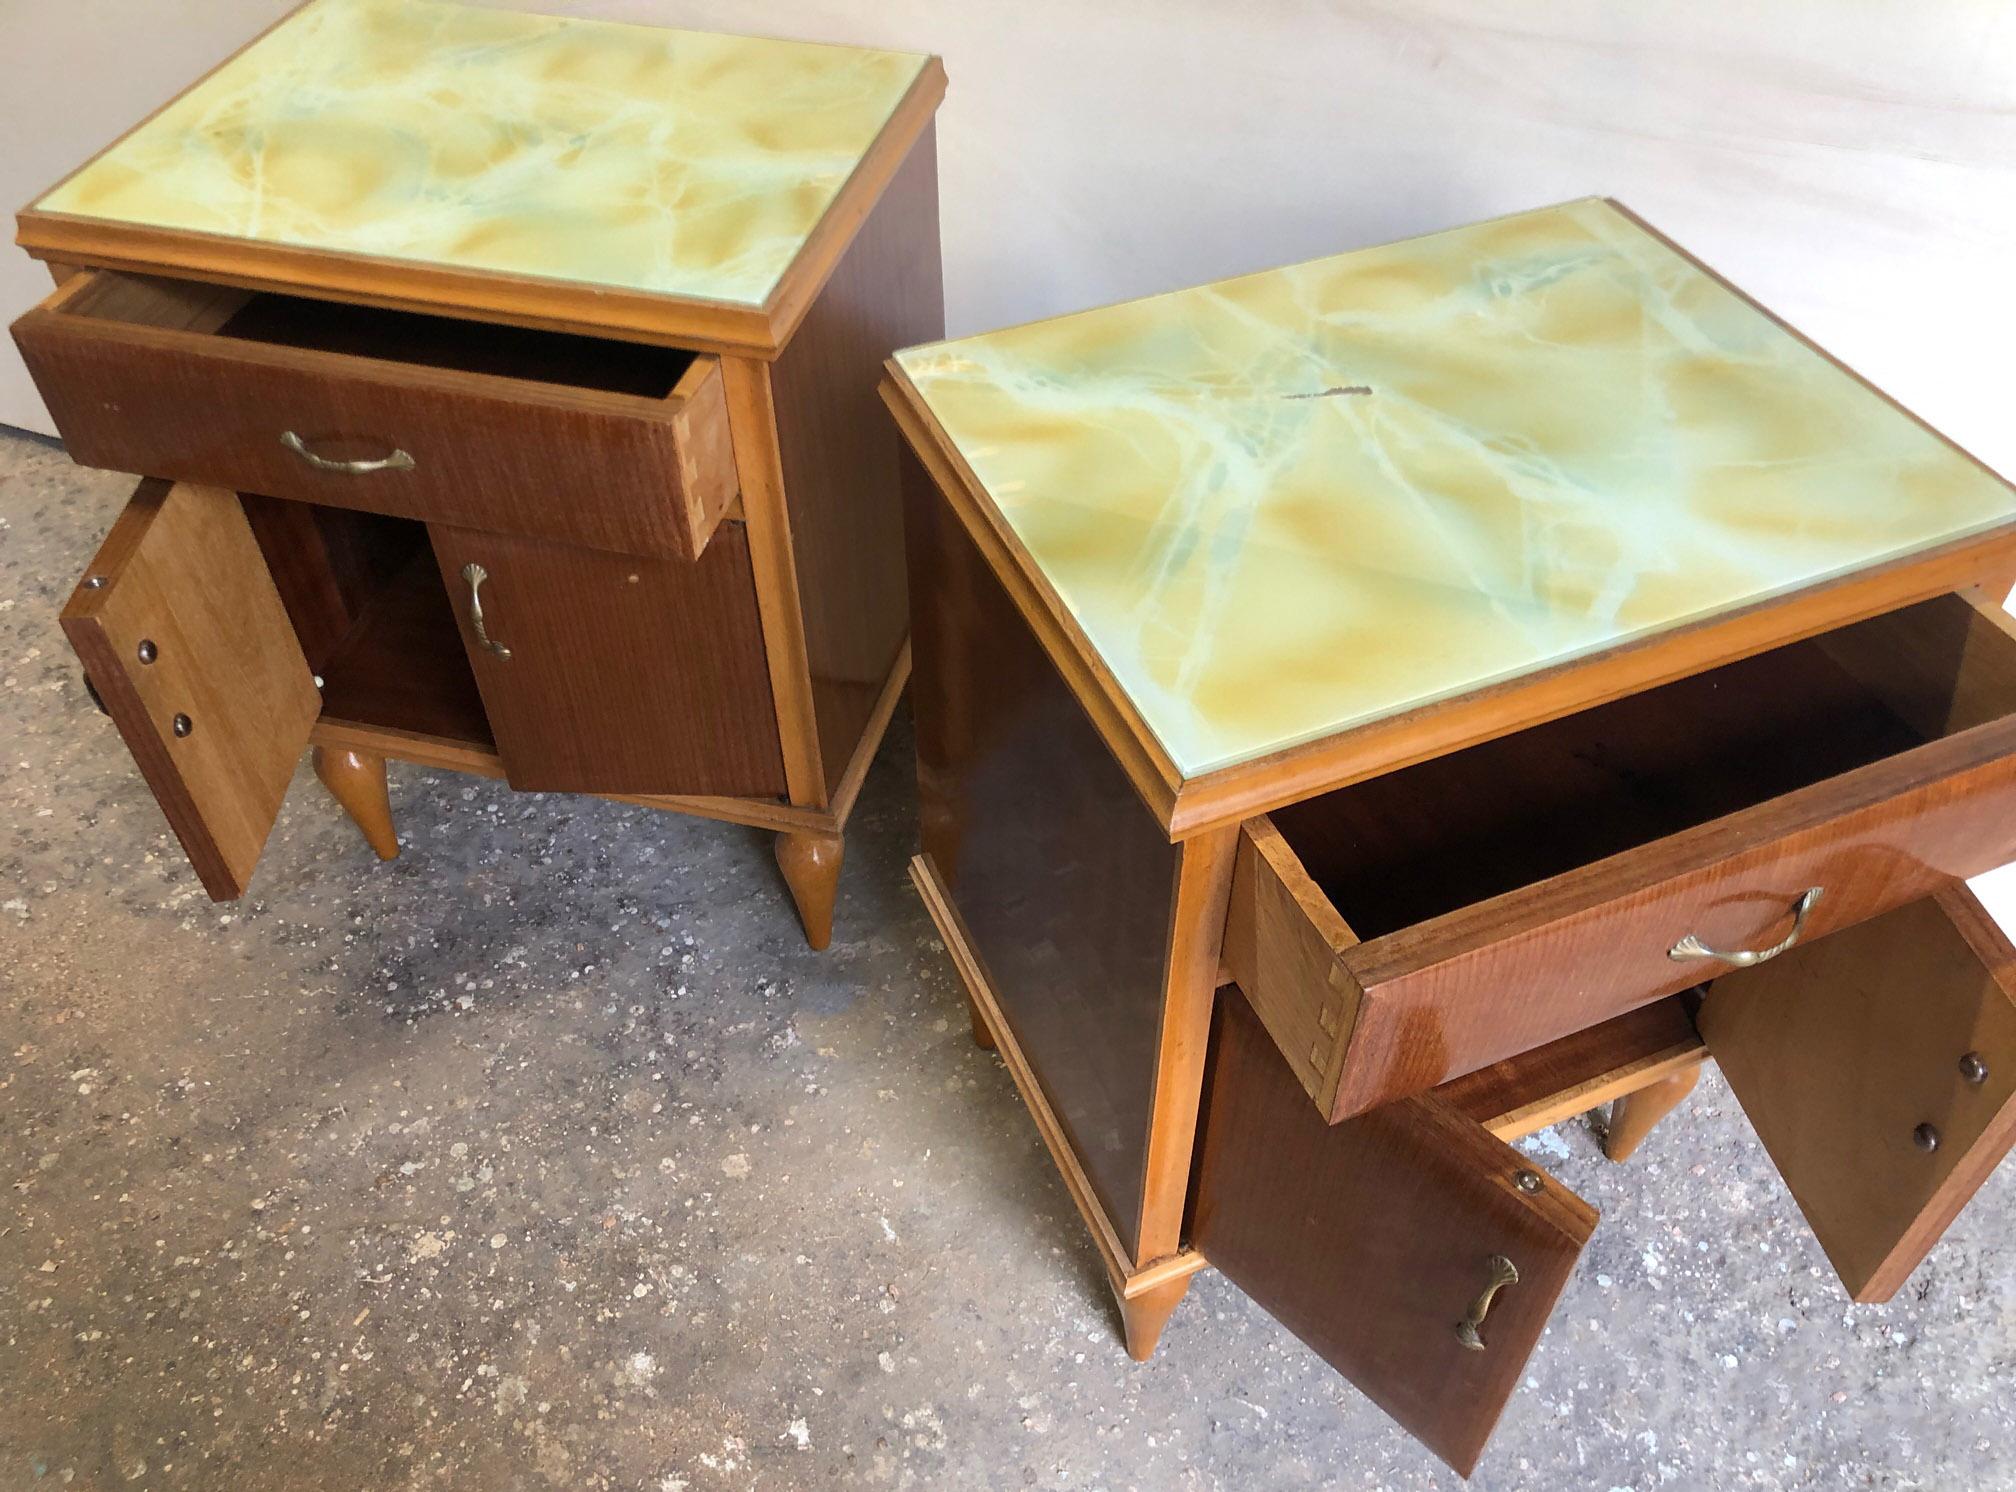 Pair of original Scandinavian style night stands,  honeycomb, Italian 1930s, one is left and  one is right, stained glass top.
Comes from an old country house in the Chianti wine area of Tuscany.
As shown in the photographs and videos, there are no